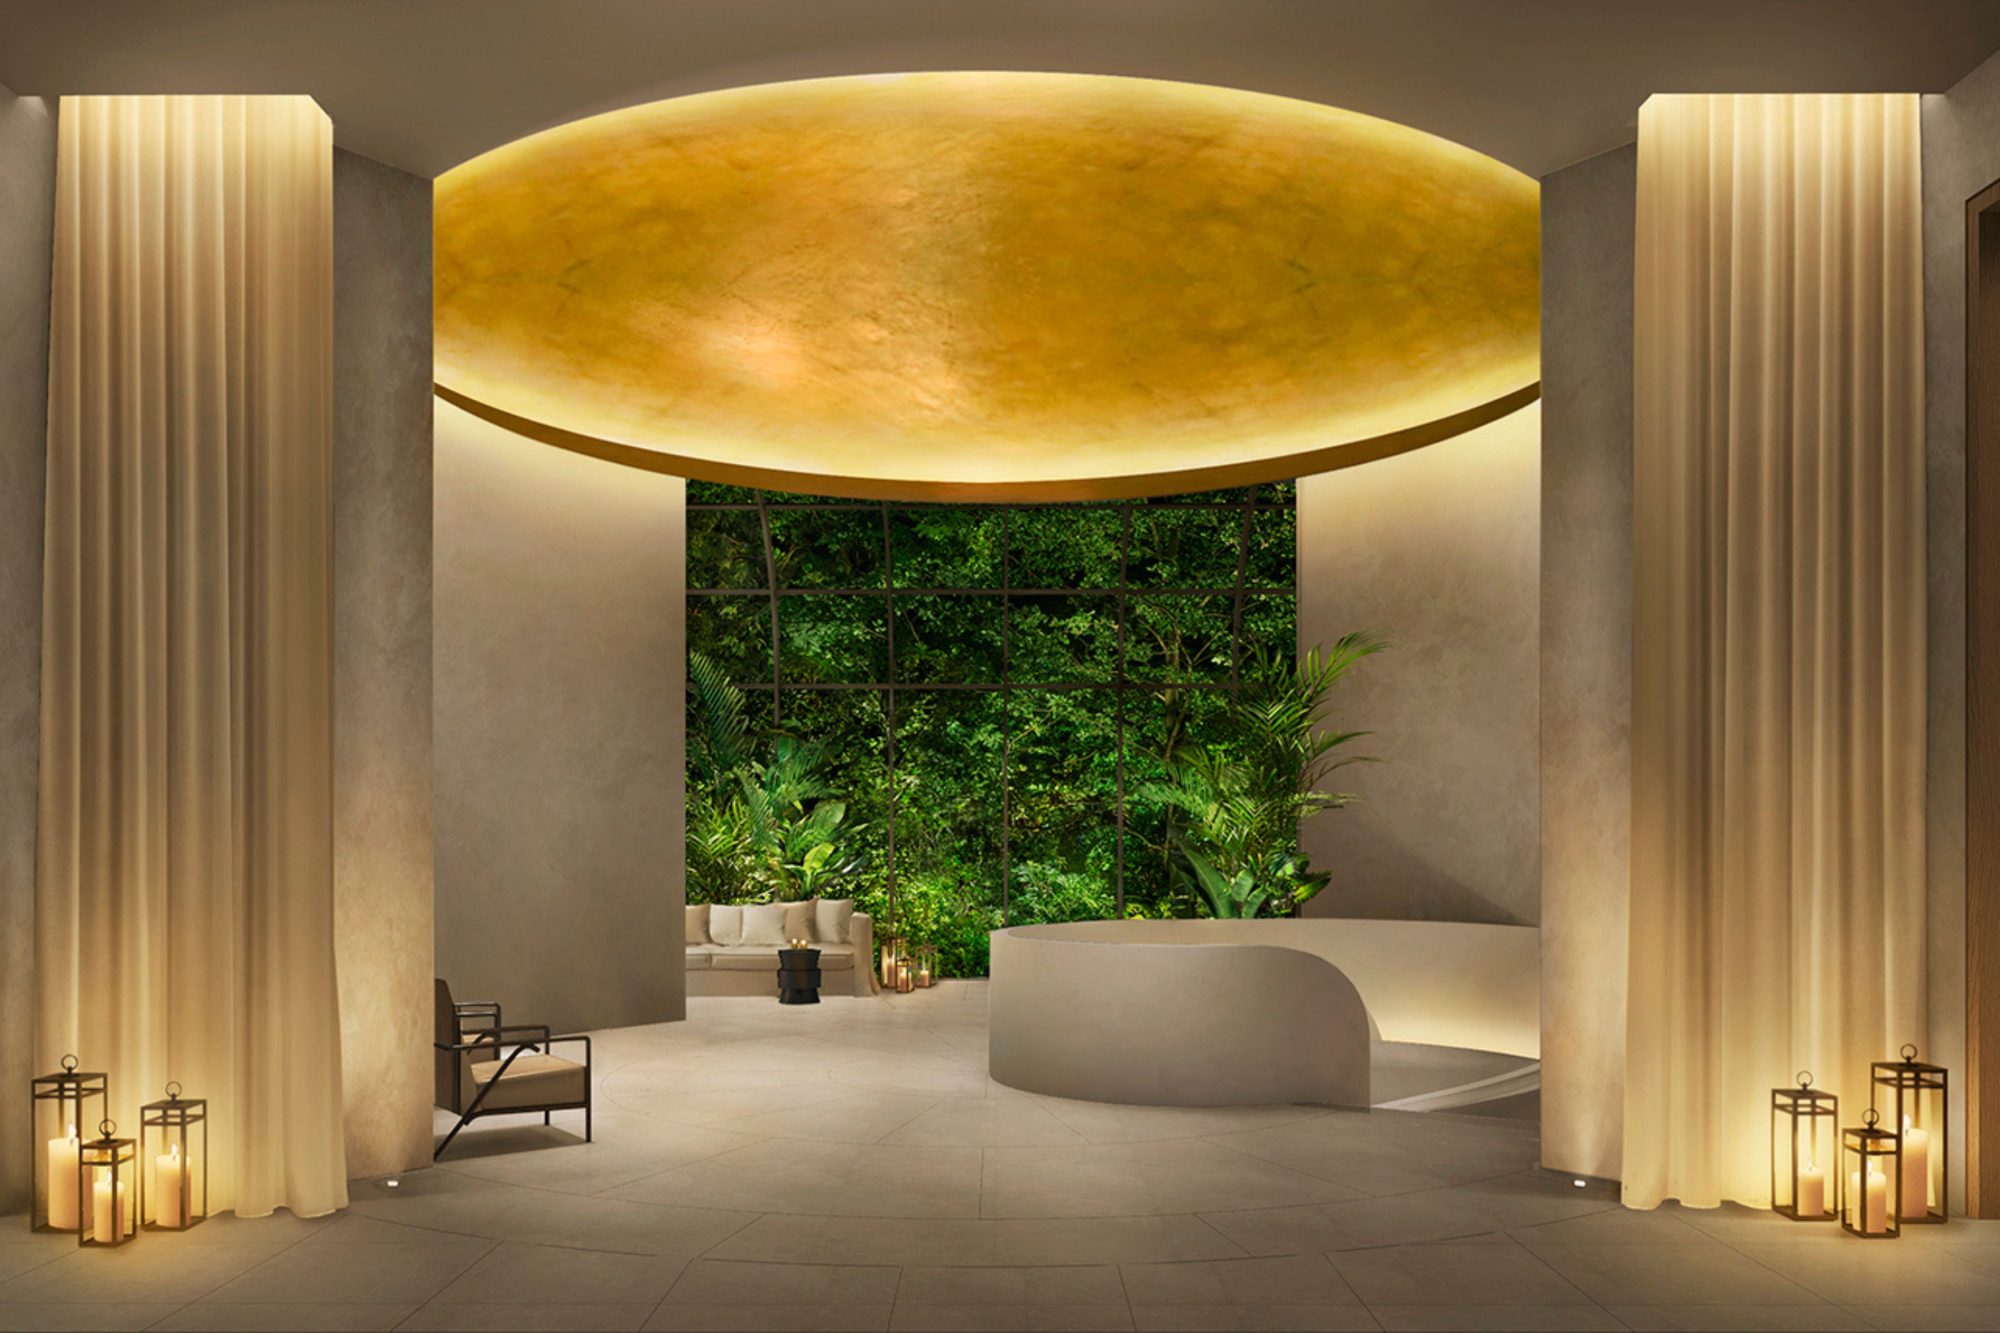 Singapore Edition welcomes guests to a serene sanctuary